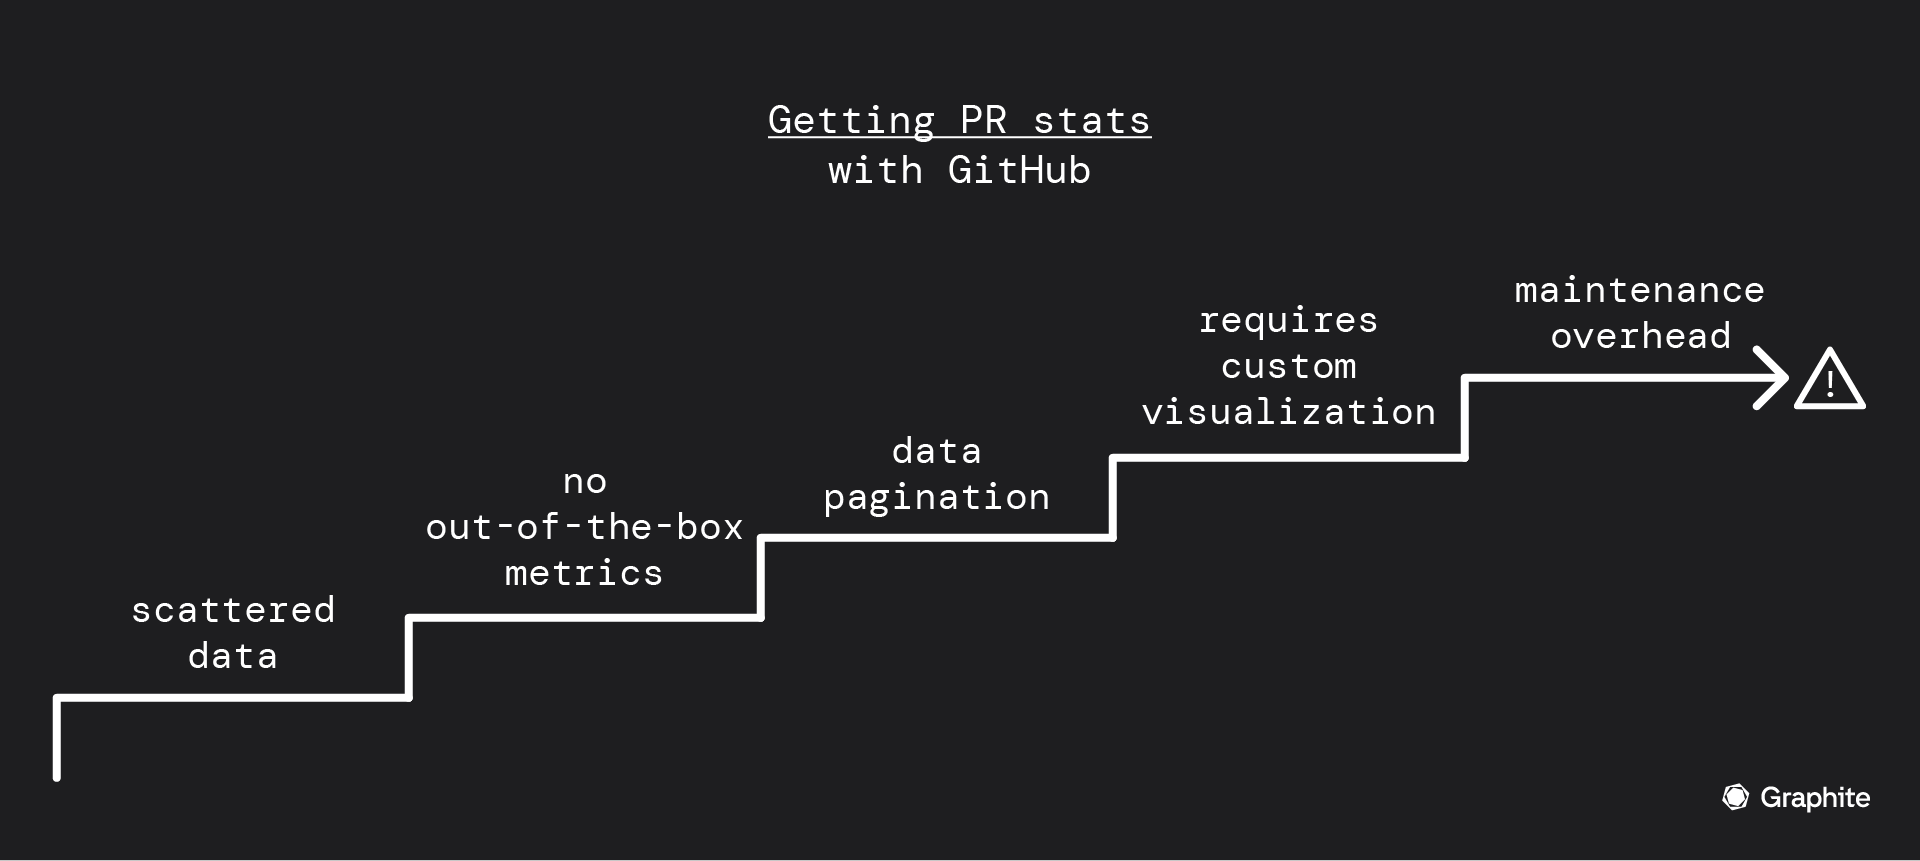 Getting PR stats with GitHub. The main challenges include: scattered data; no out-of-the-box metrics; data pagination; requires custom visualization; maintenance overhead